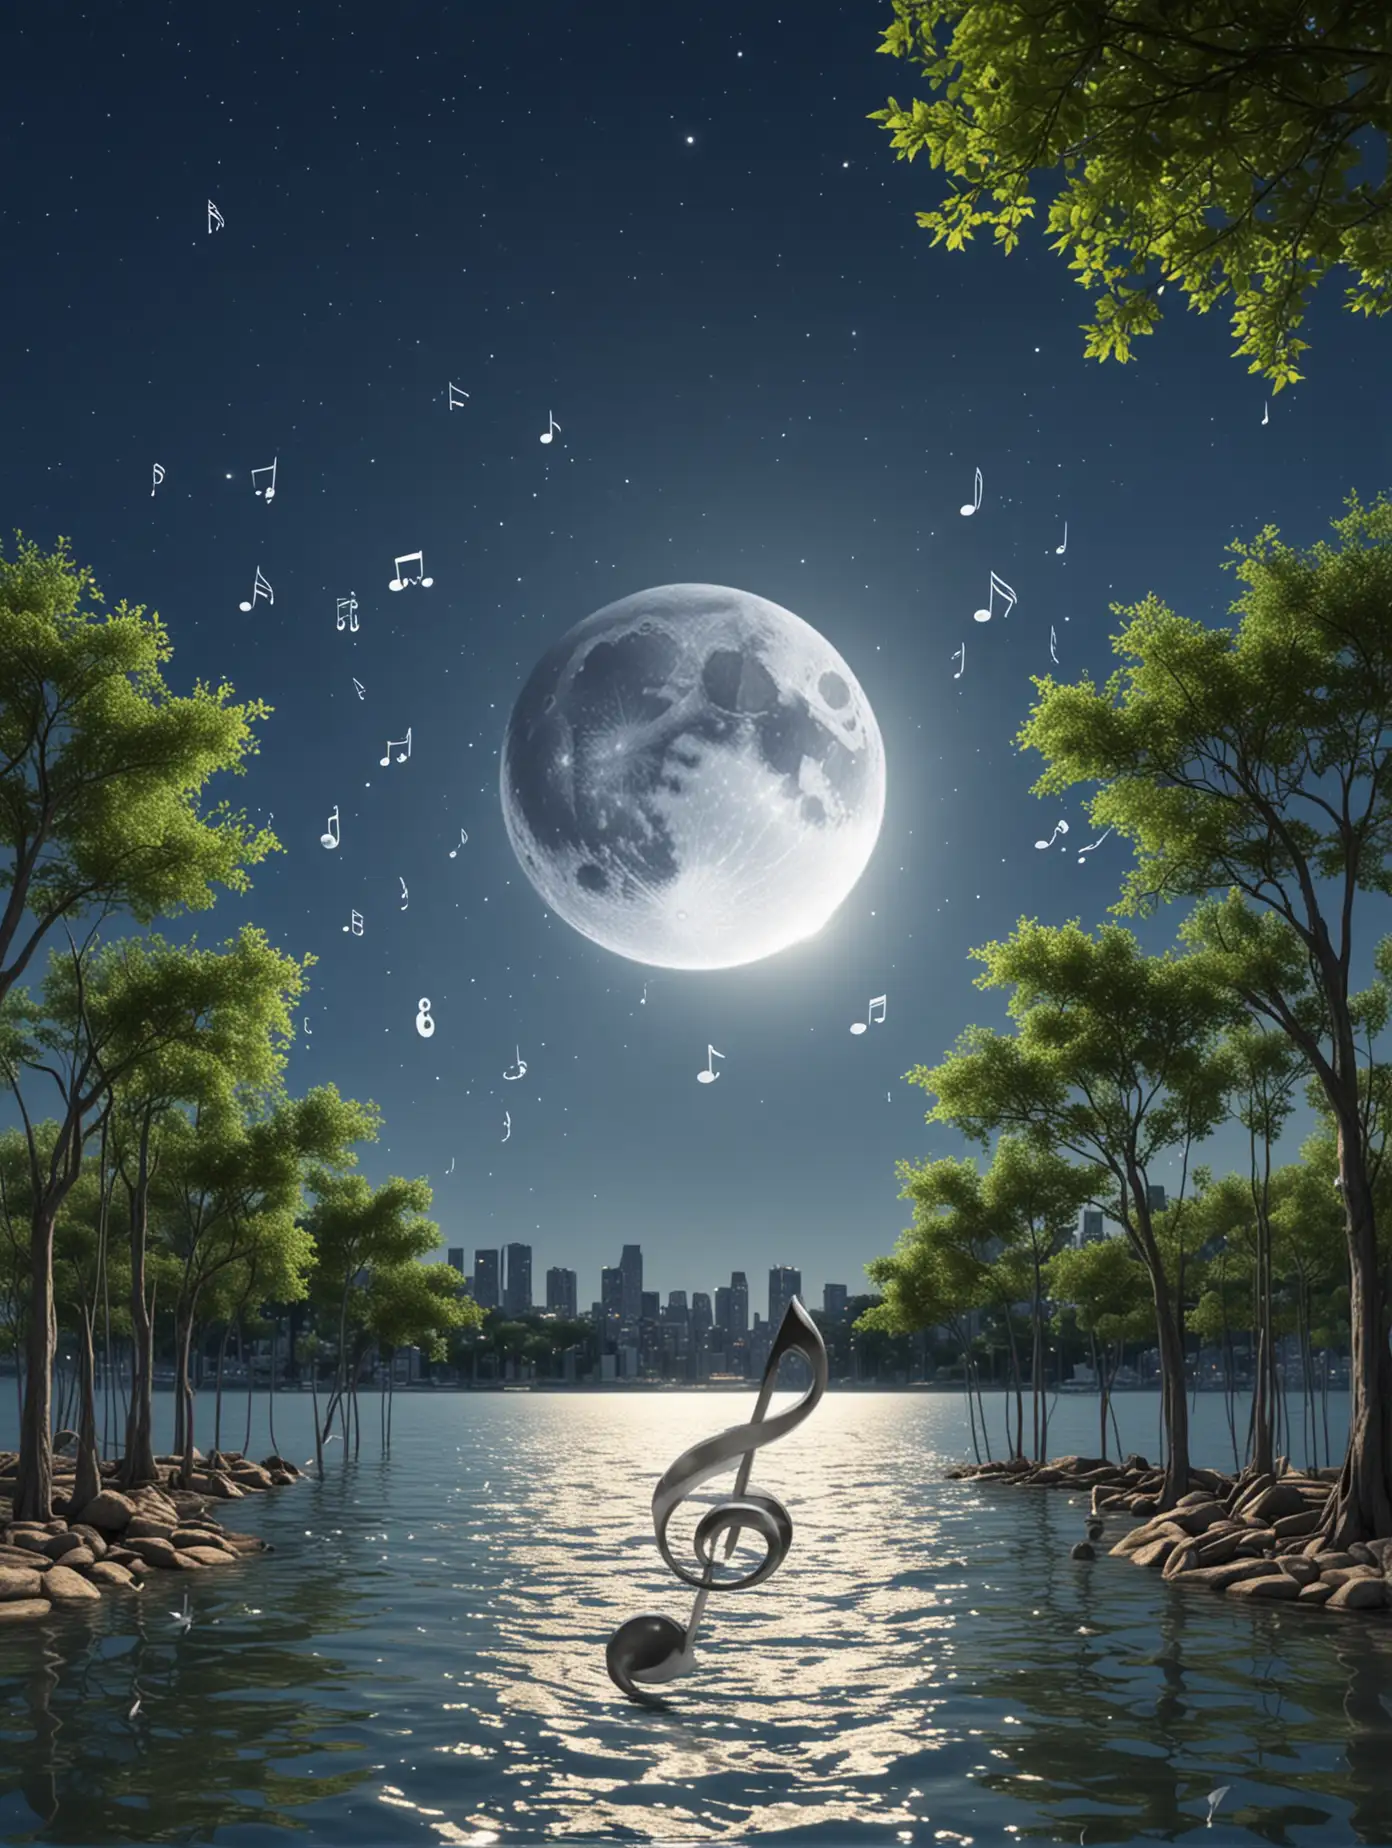 Moon and Musical Notes Twinkling over City in the Sea